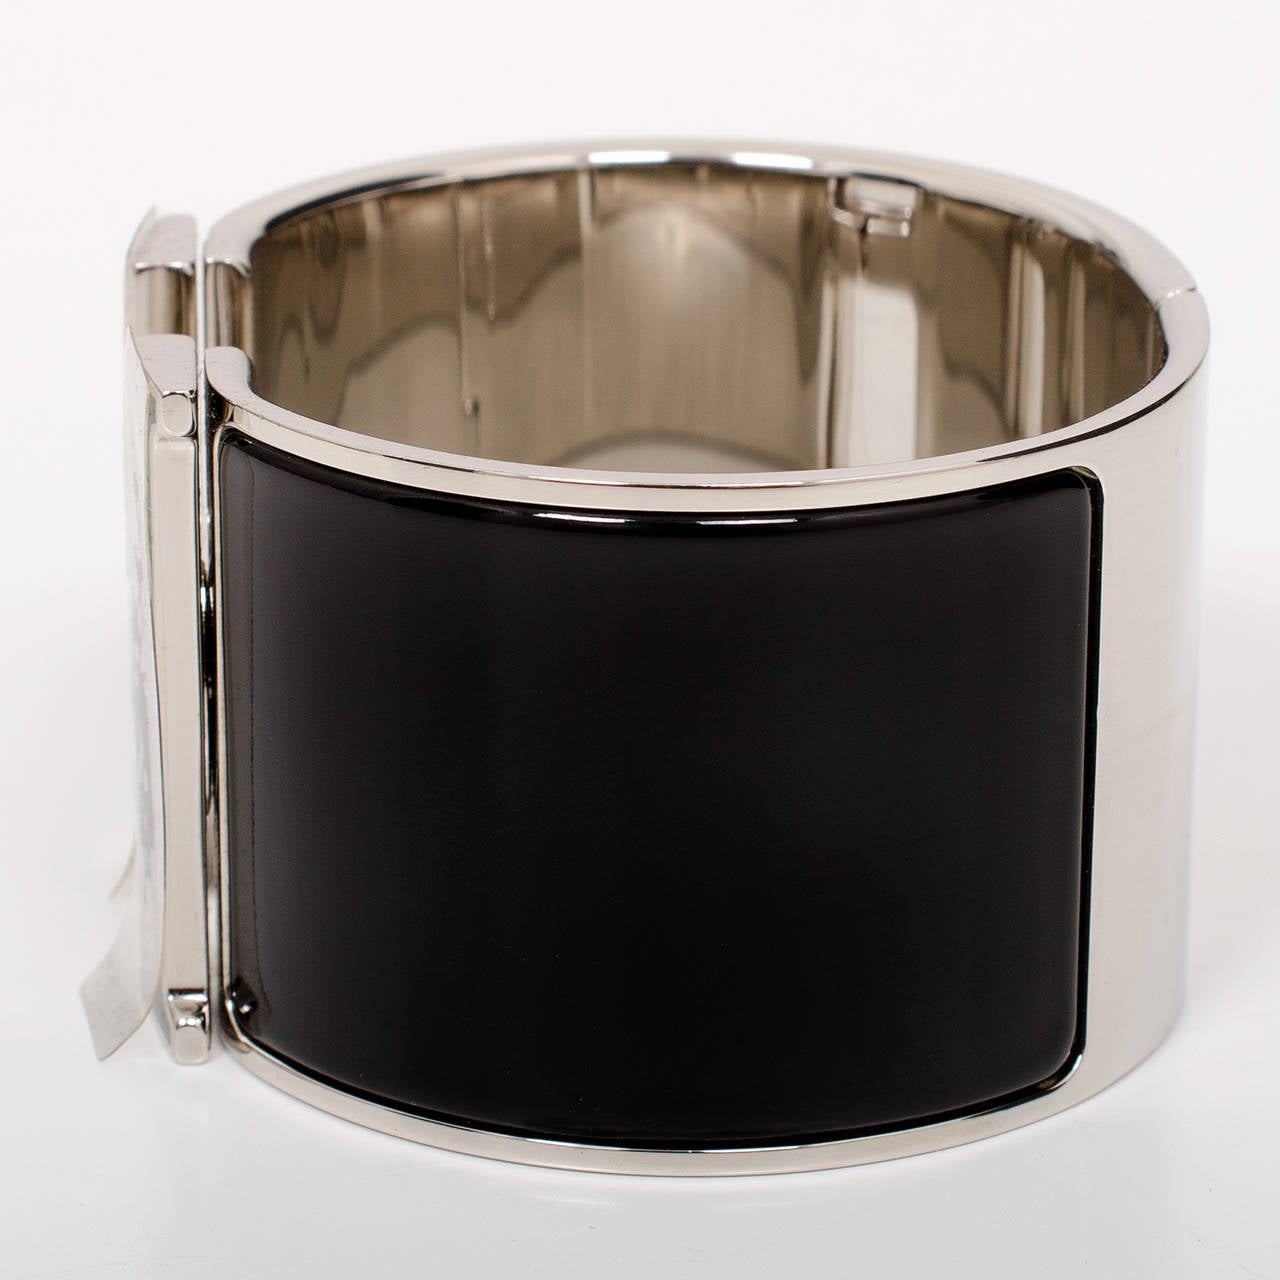 Hermes extra wide Clic Clac H bracelet in black enamel with black enamel H closure and palladium and silver plated hardware in size PM.

Origin: France

Condition: Never worn (plastic on enamel H)

Accompanied by: Hermes box, Hermes dustbag